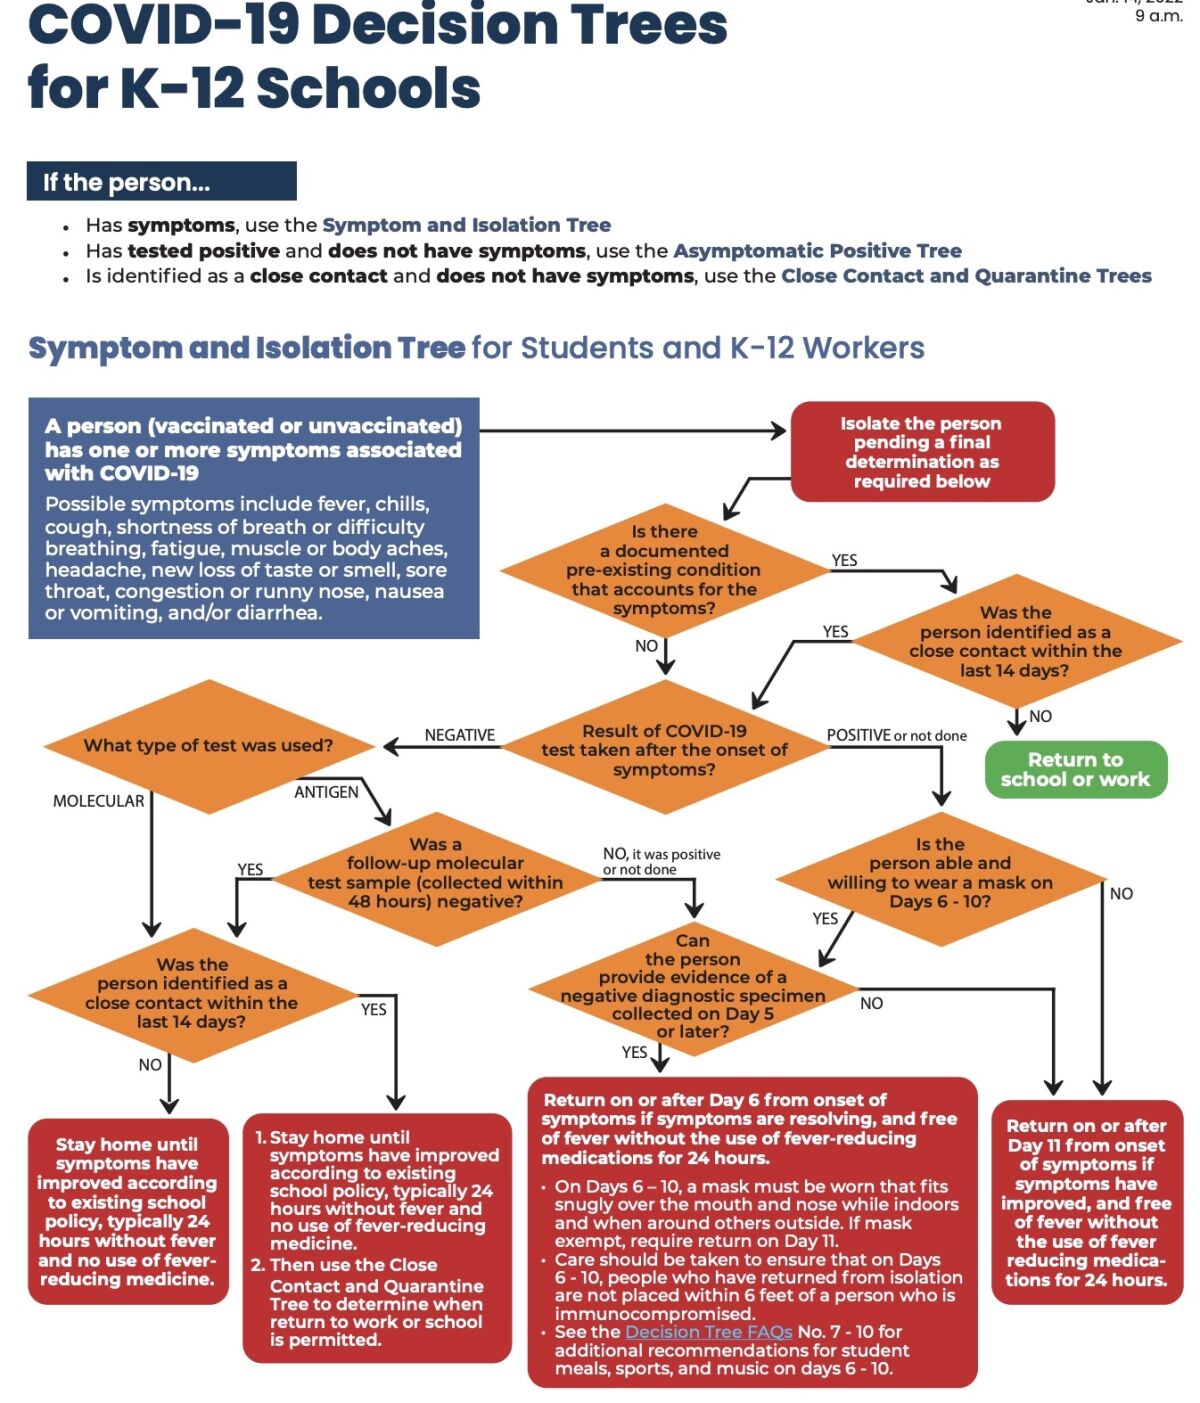 This is part of the San Diego County Office of Education's four-page COVID-19 Decision Tree.